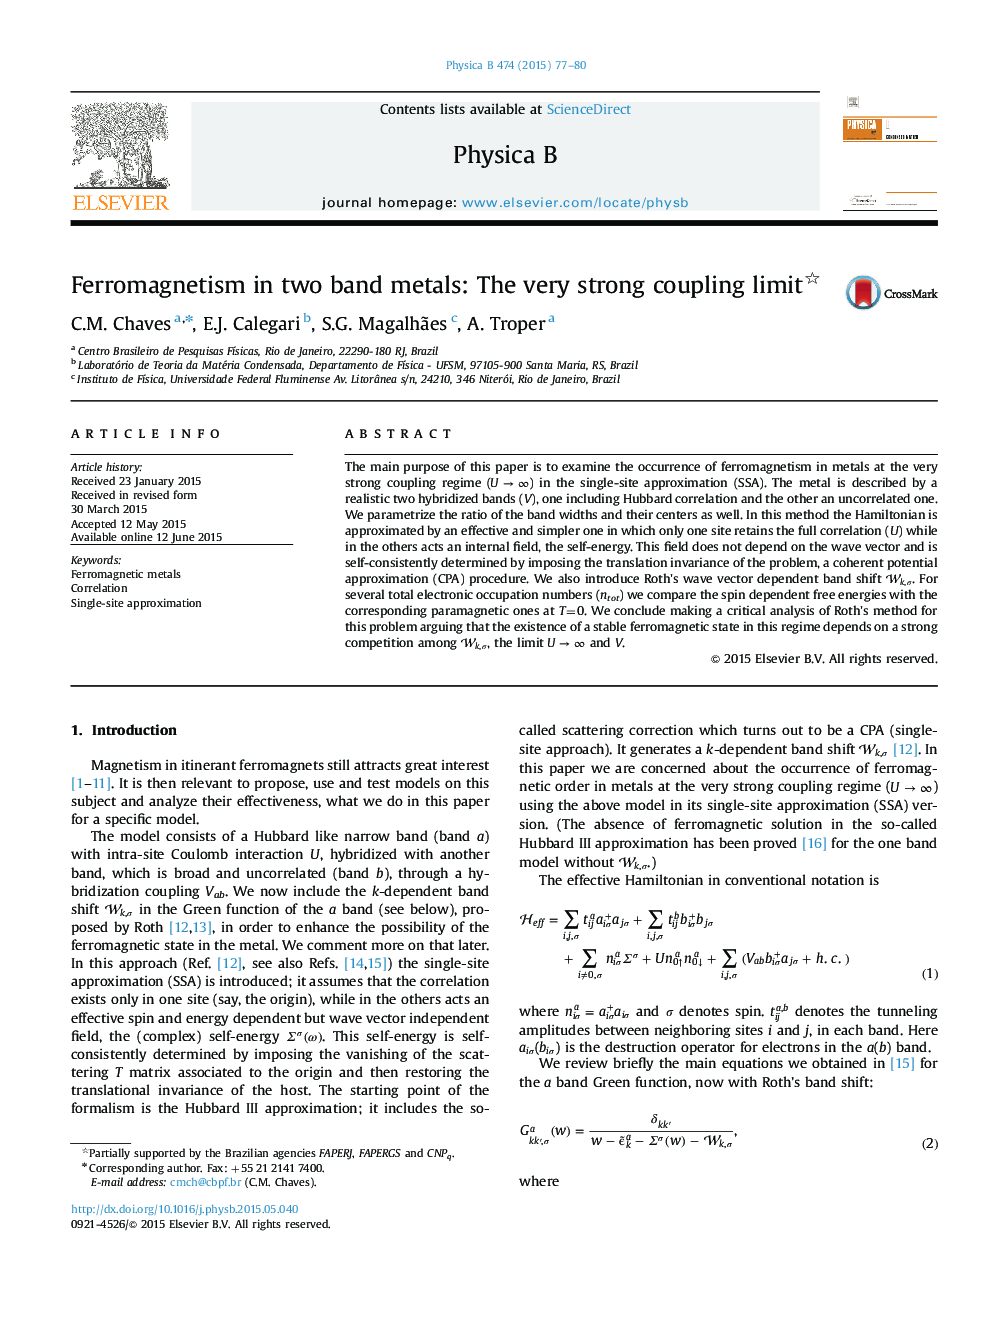 Ferromagnetism in two band metals: The very strong coupling limit